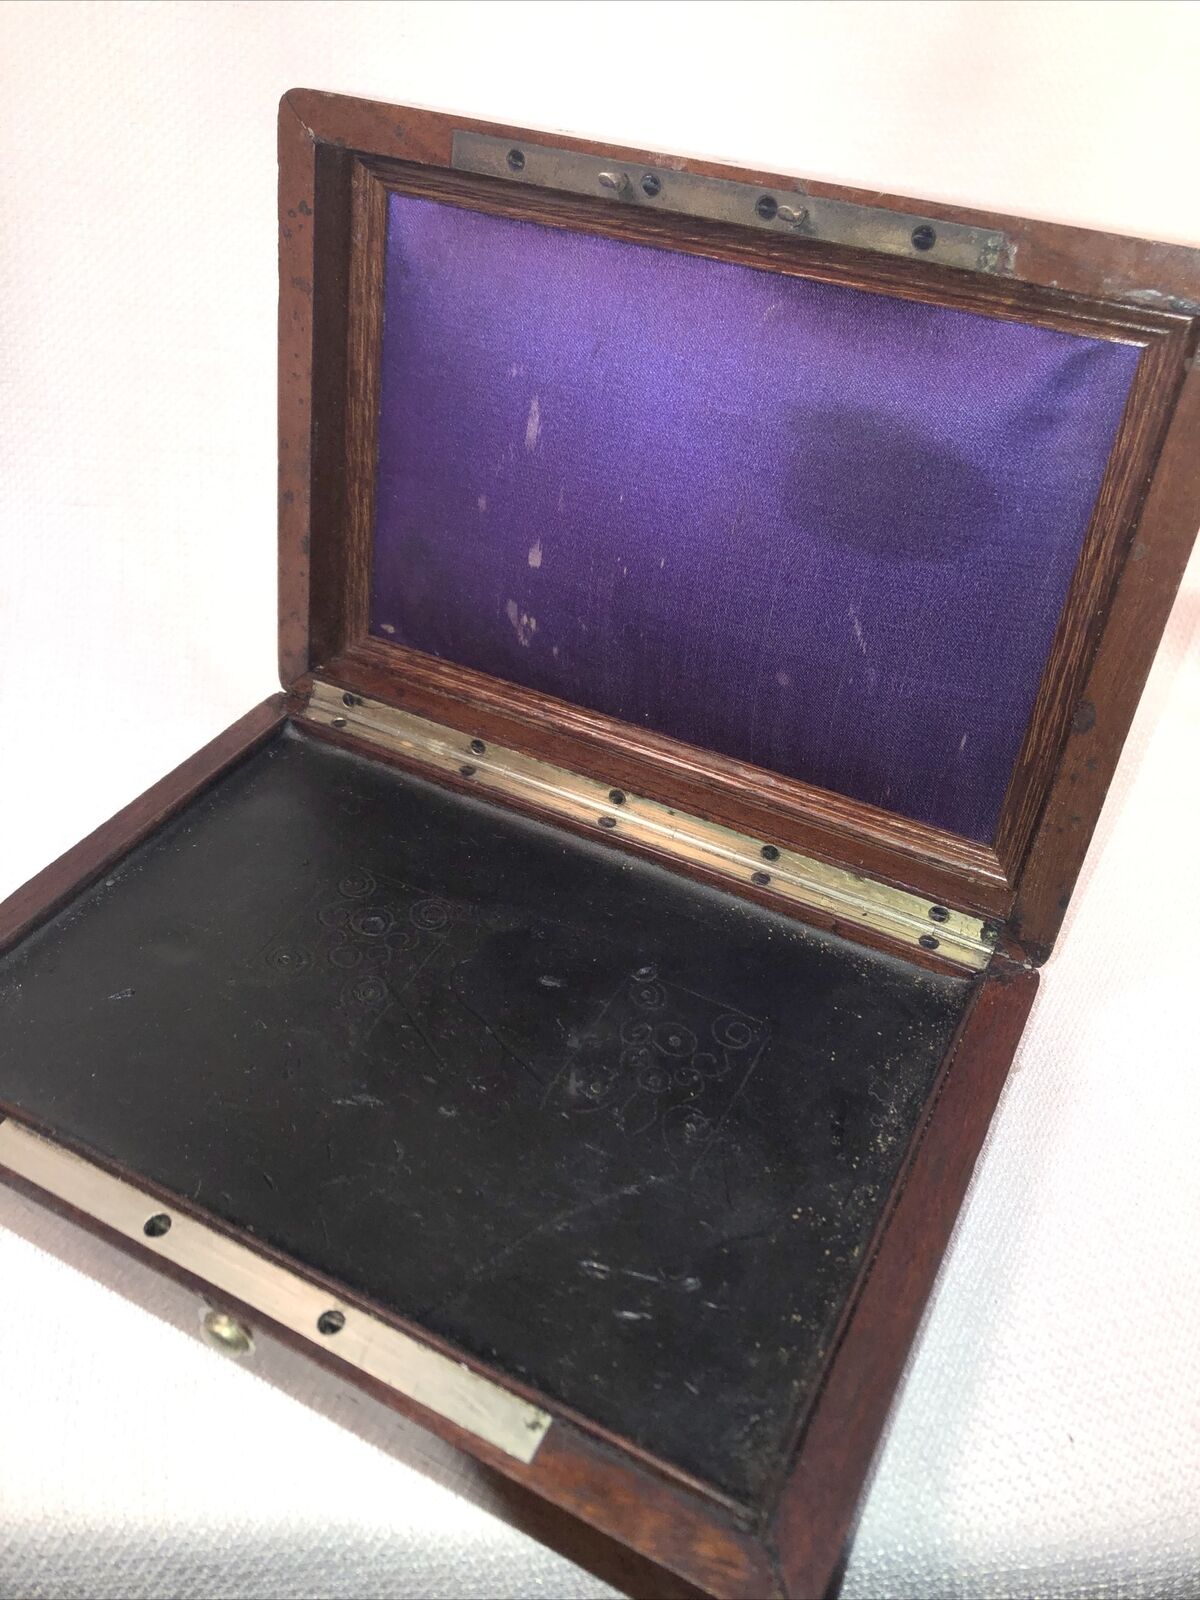 Wax Tablet Without Stylus Vintage In Wooden Case